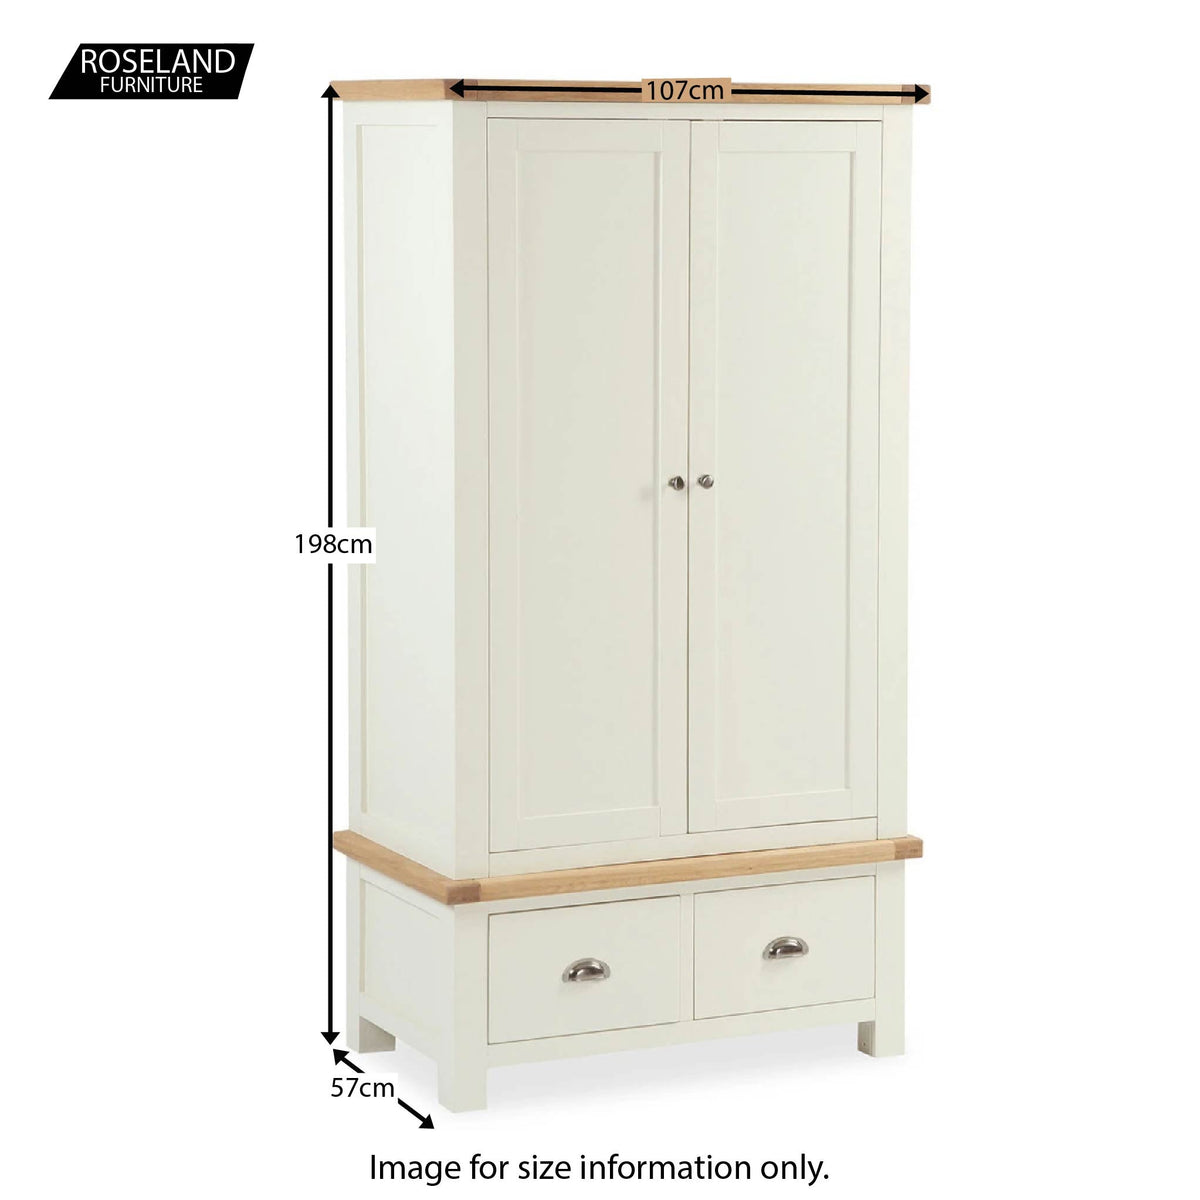 Daymer Cream Double Wardrobe with Drawers - Size Guide